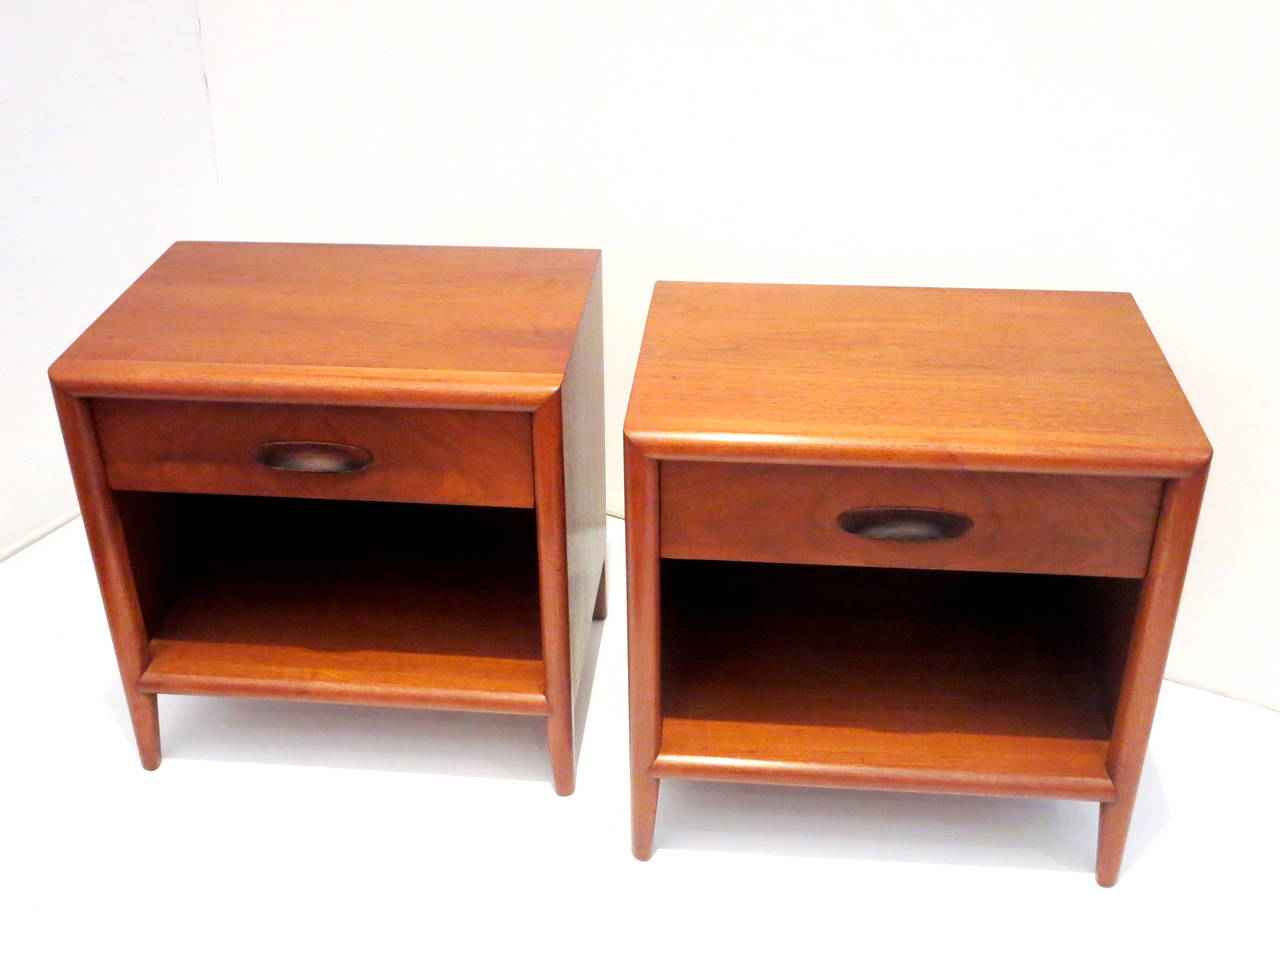 Great set of nightstands in mahogany wood with single drawer and bottom shelf freshly refinished attributed to T.H. Robsjohn-Gibbings for Widdicomb retains its label.